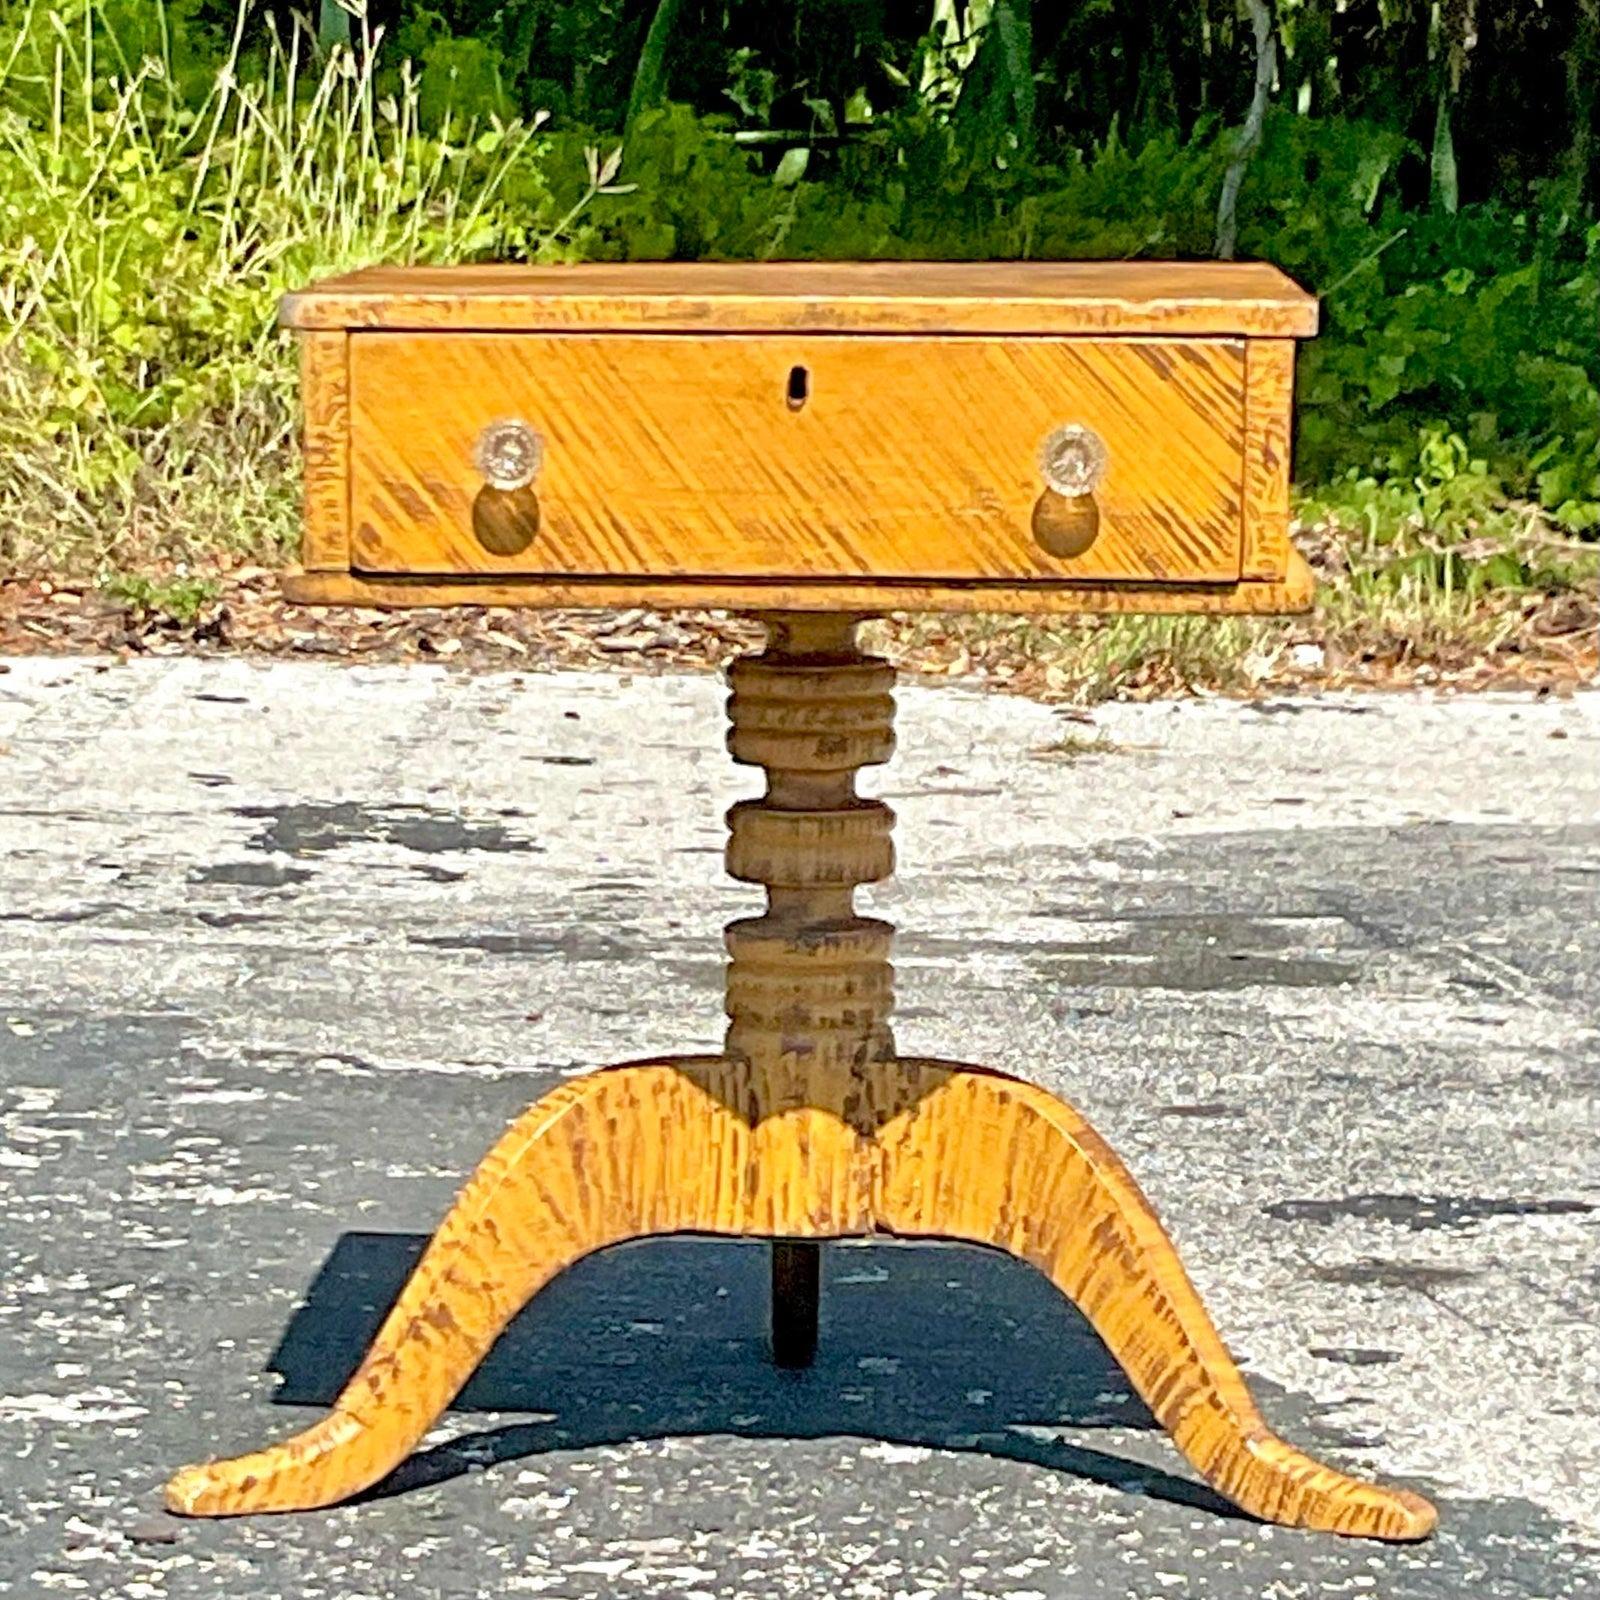 A stunning late 19th century sewing table with a single drawer and original glass knobs. The table sits on three splayed legs from a central column. Acquired at a Palm Beach estate.